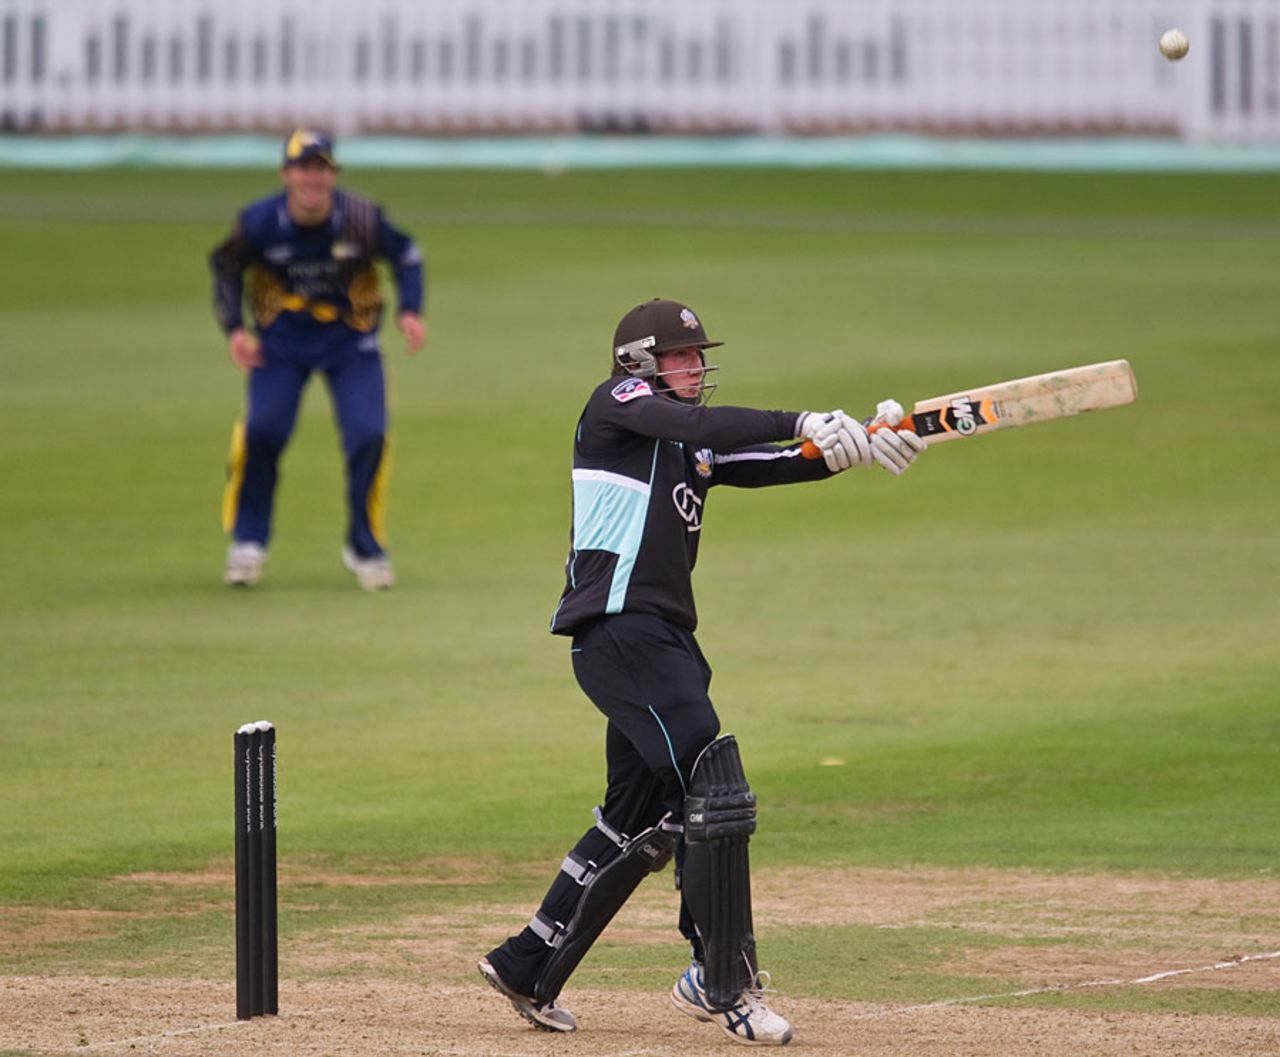 Zafar Ansari clubbed 60 off 54 balls, Surrey v Durham, Clydesdale Bank 40, The Oval, May 20, 2012